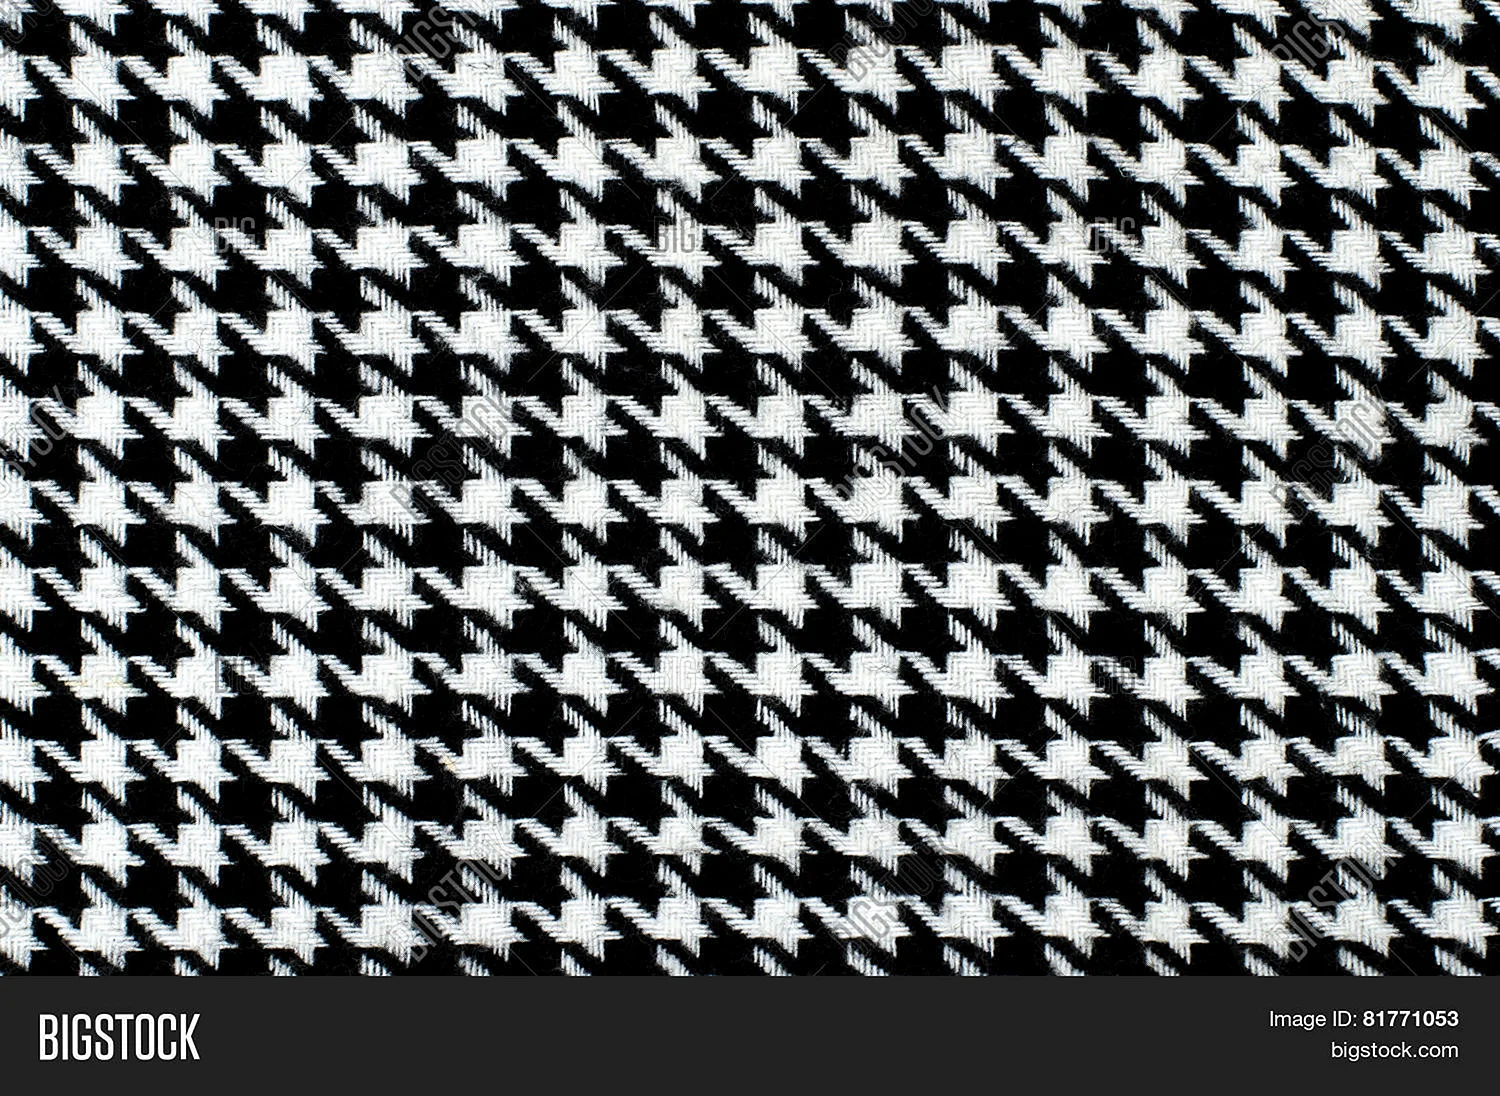 Ant Houndstooth pattern